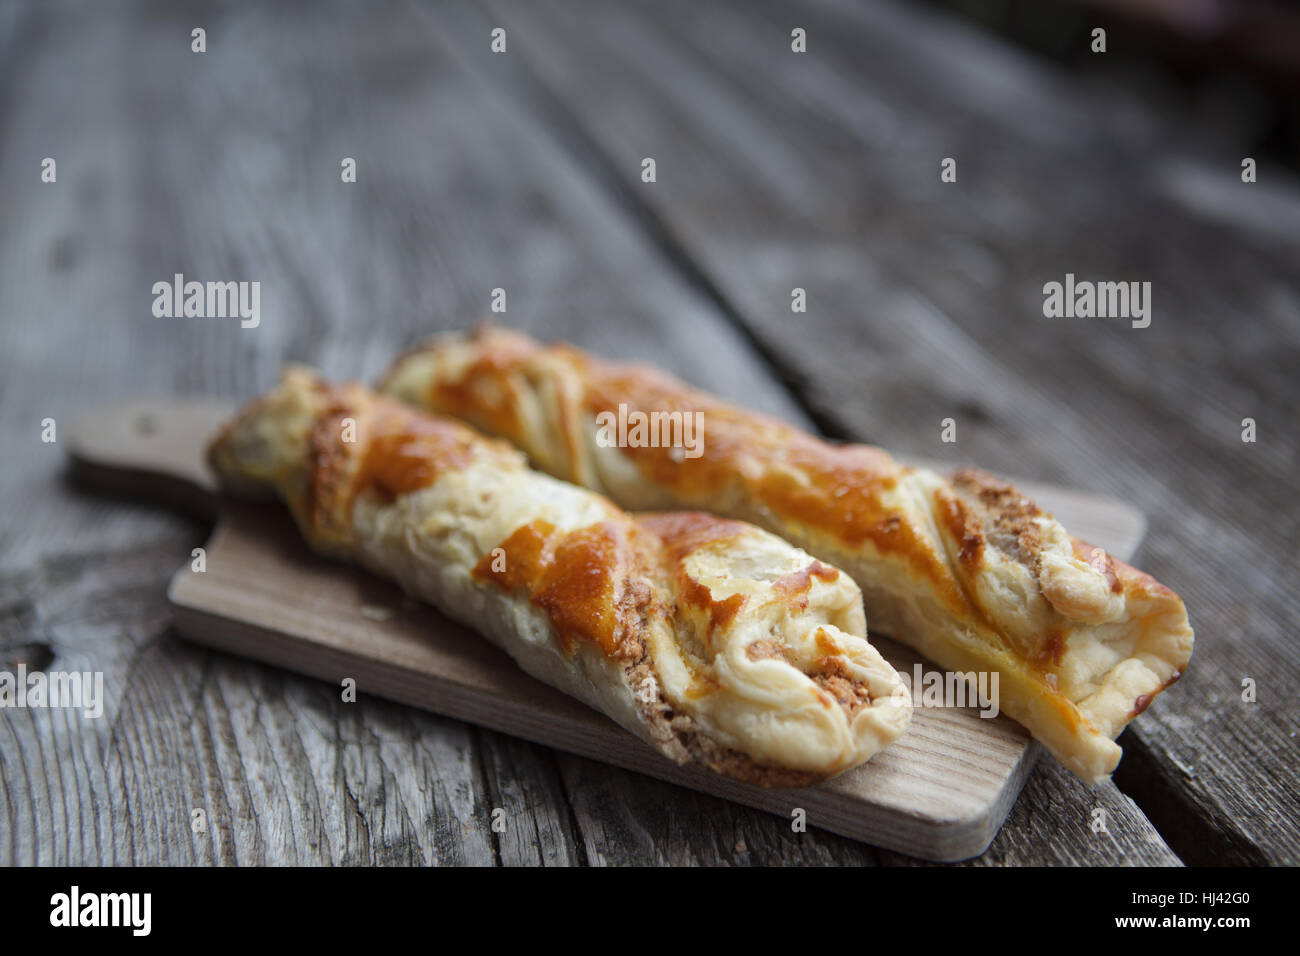 alps, hike, go hiking, ramble, pastry, baked, cute, fresh, migrate, snack time, Stock Photo